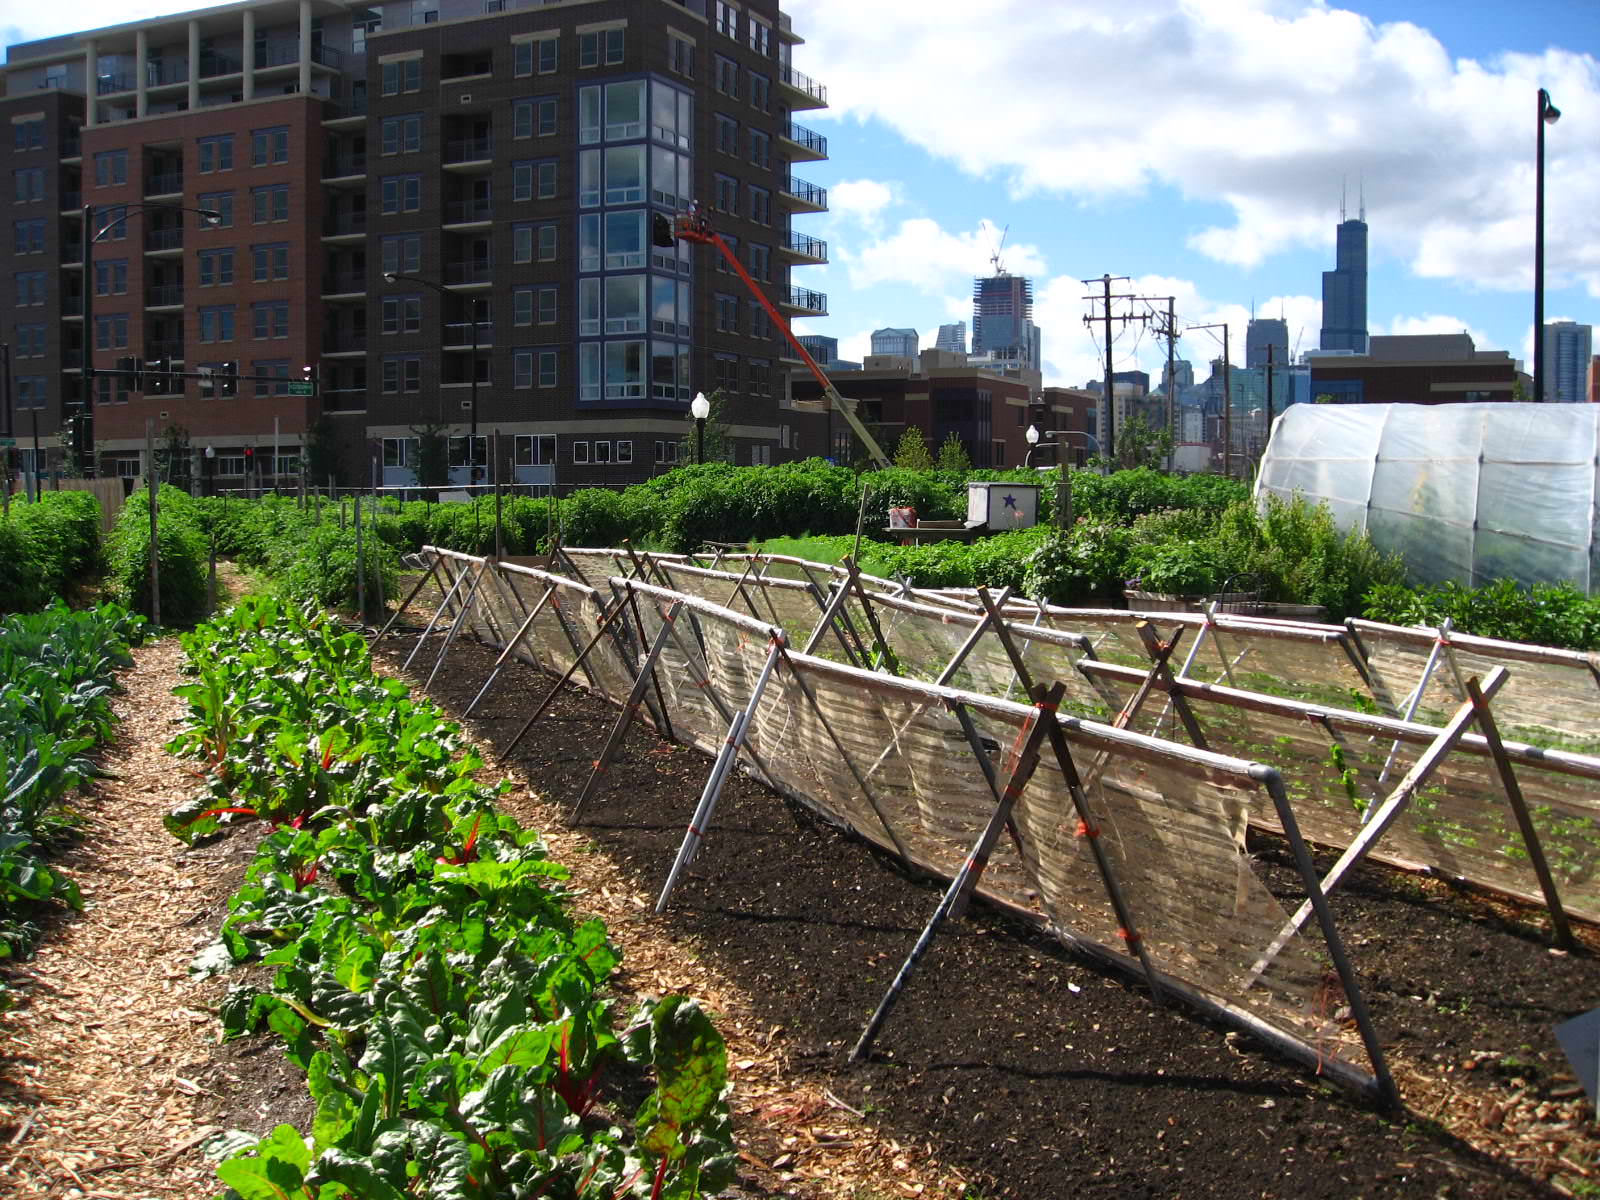 Researchers Outline the Interconnected Benefits of Urban Agriculture